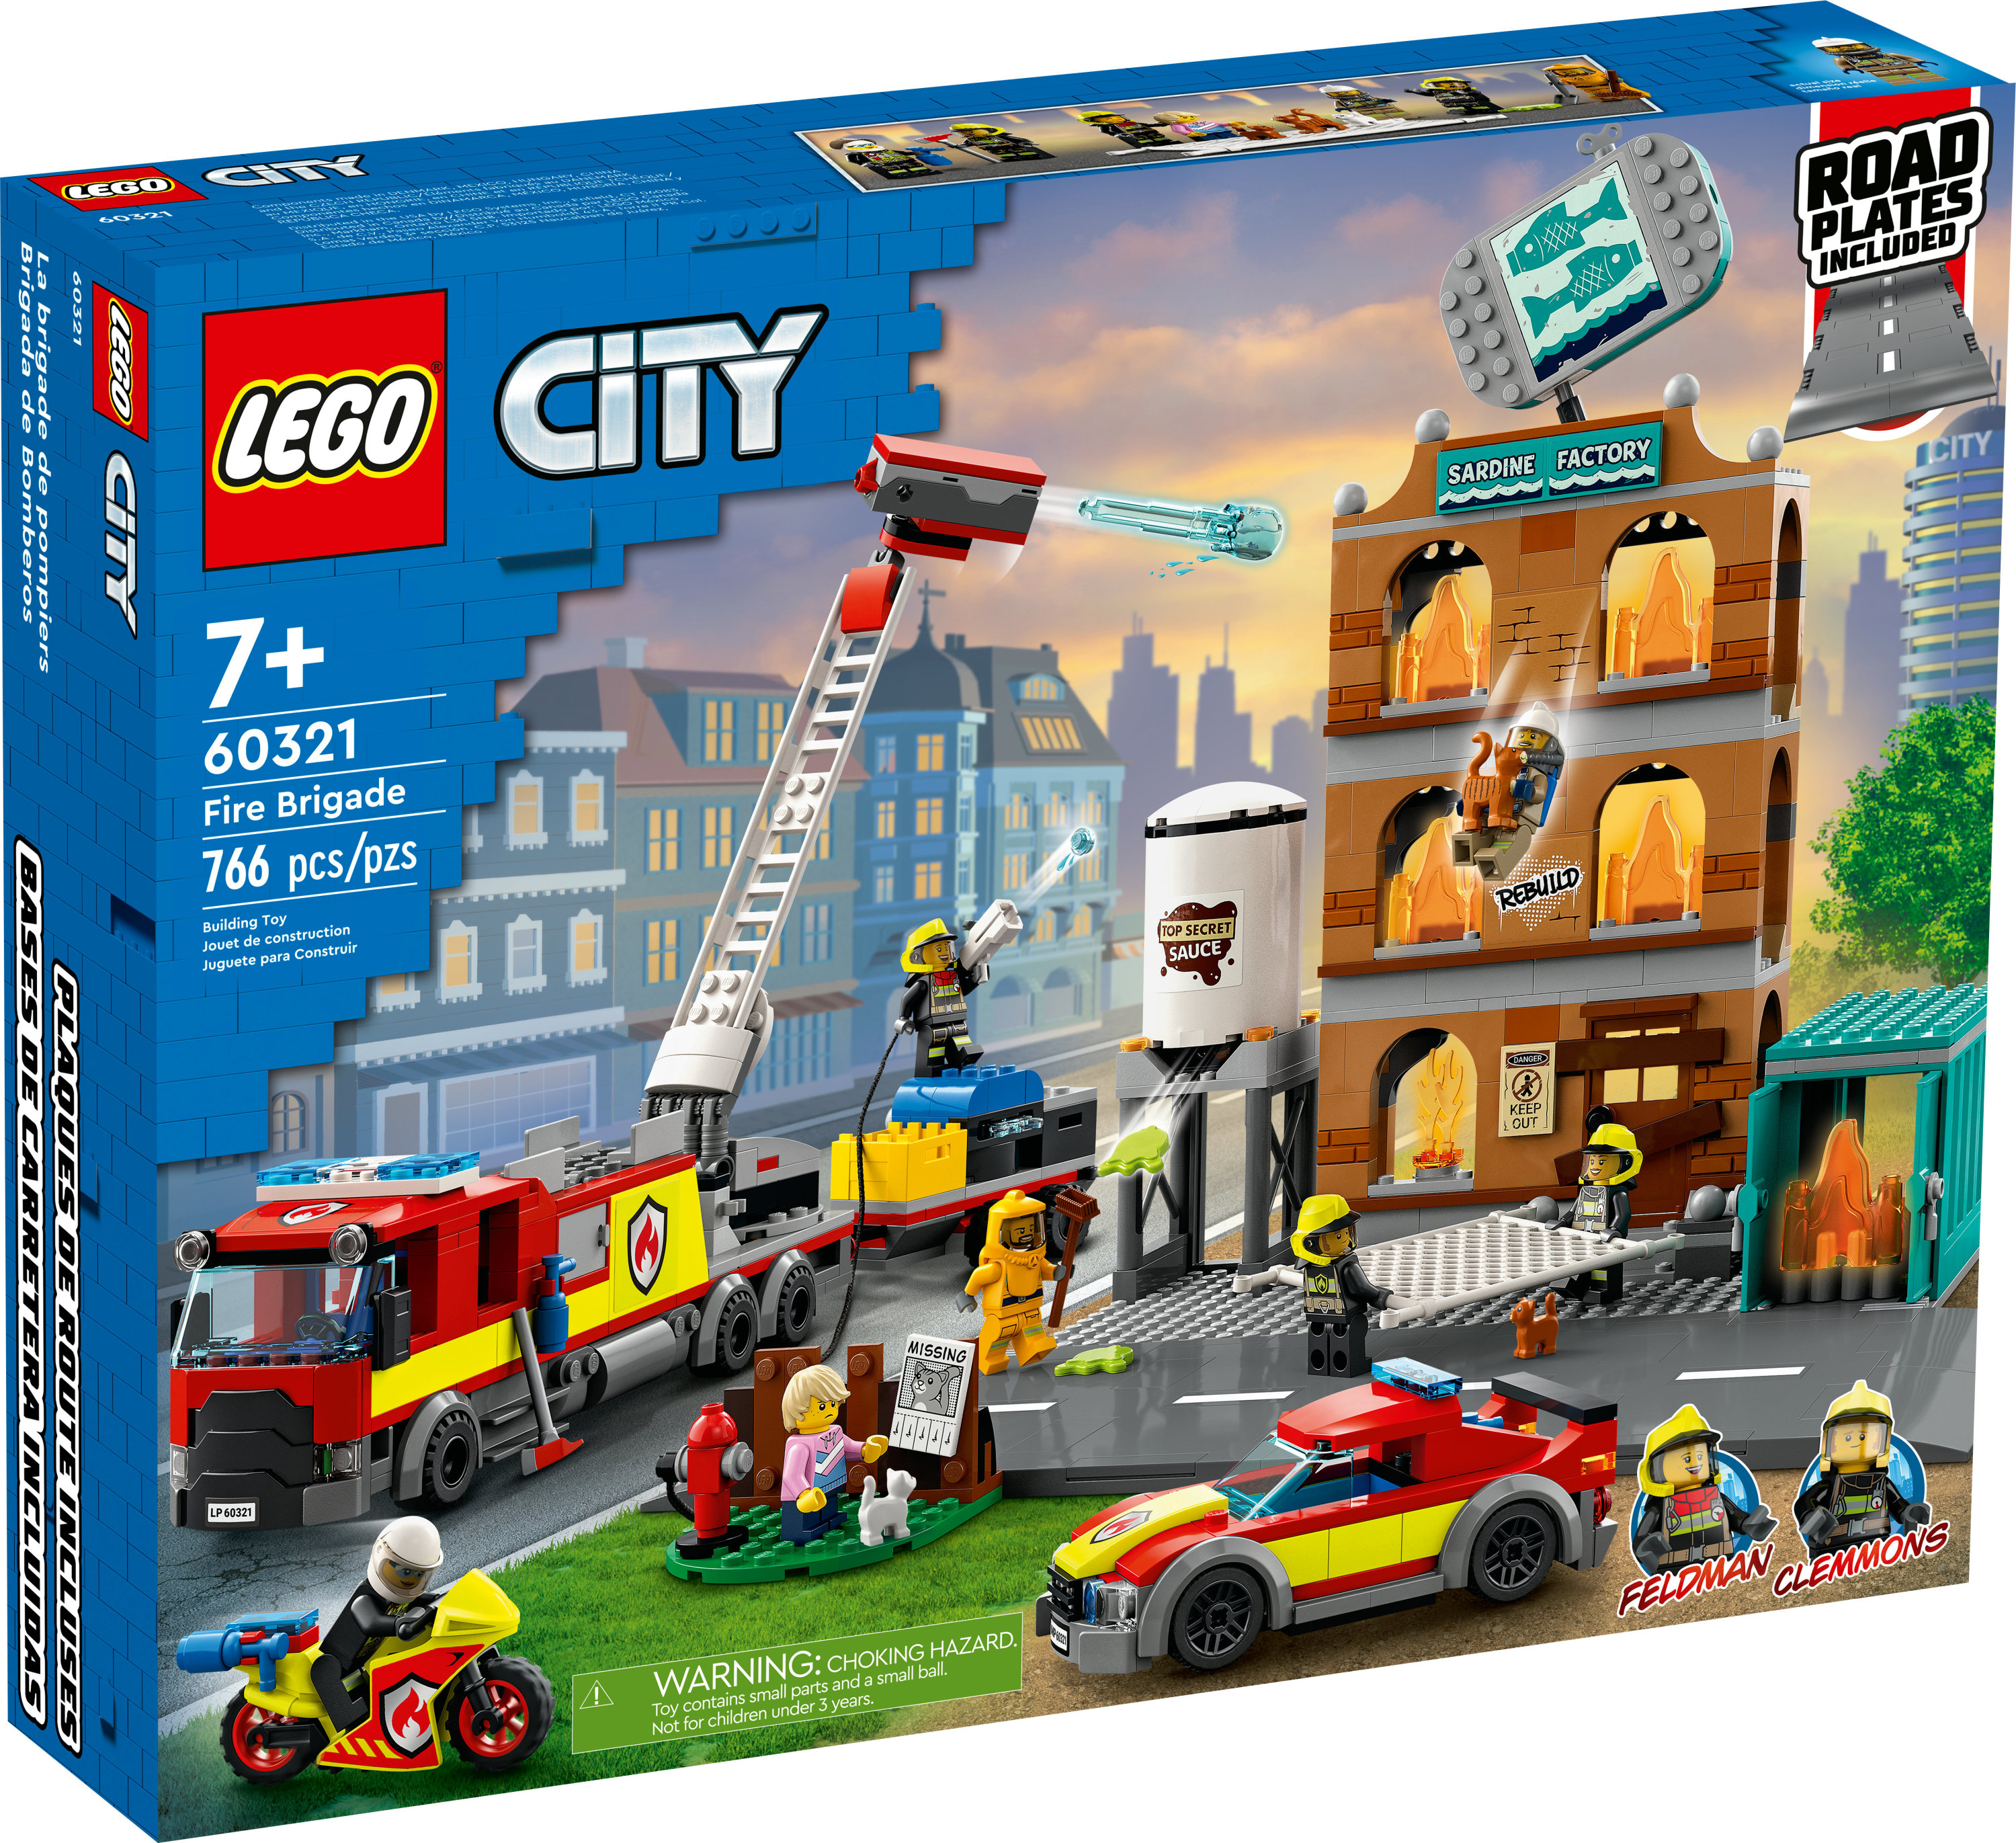 LEGO City Fire Brigade 60321 Building Set with Toy Fire Truck and Five Minifigures. Pretend Play Fire Engine Toy for Kids, Boys, and Girls Ages 7+ - image 3 of 8